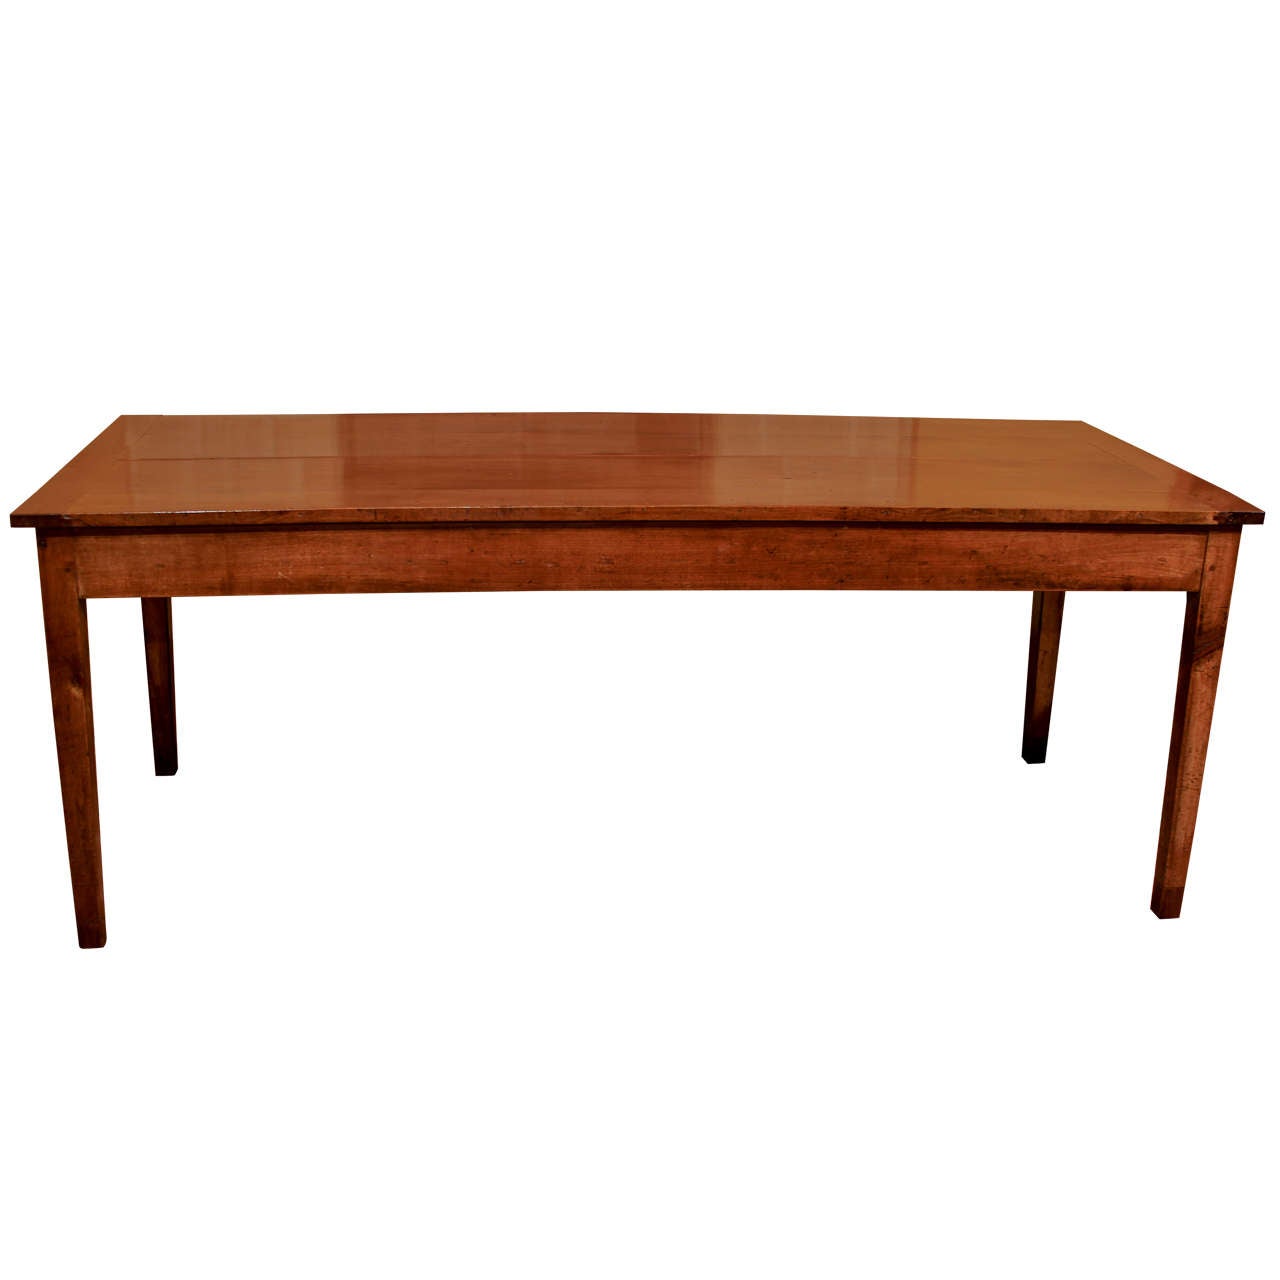 French Cherry Wood Farm Table For Sale